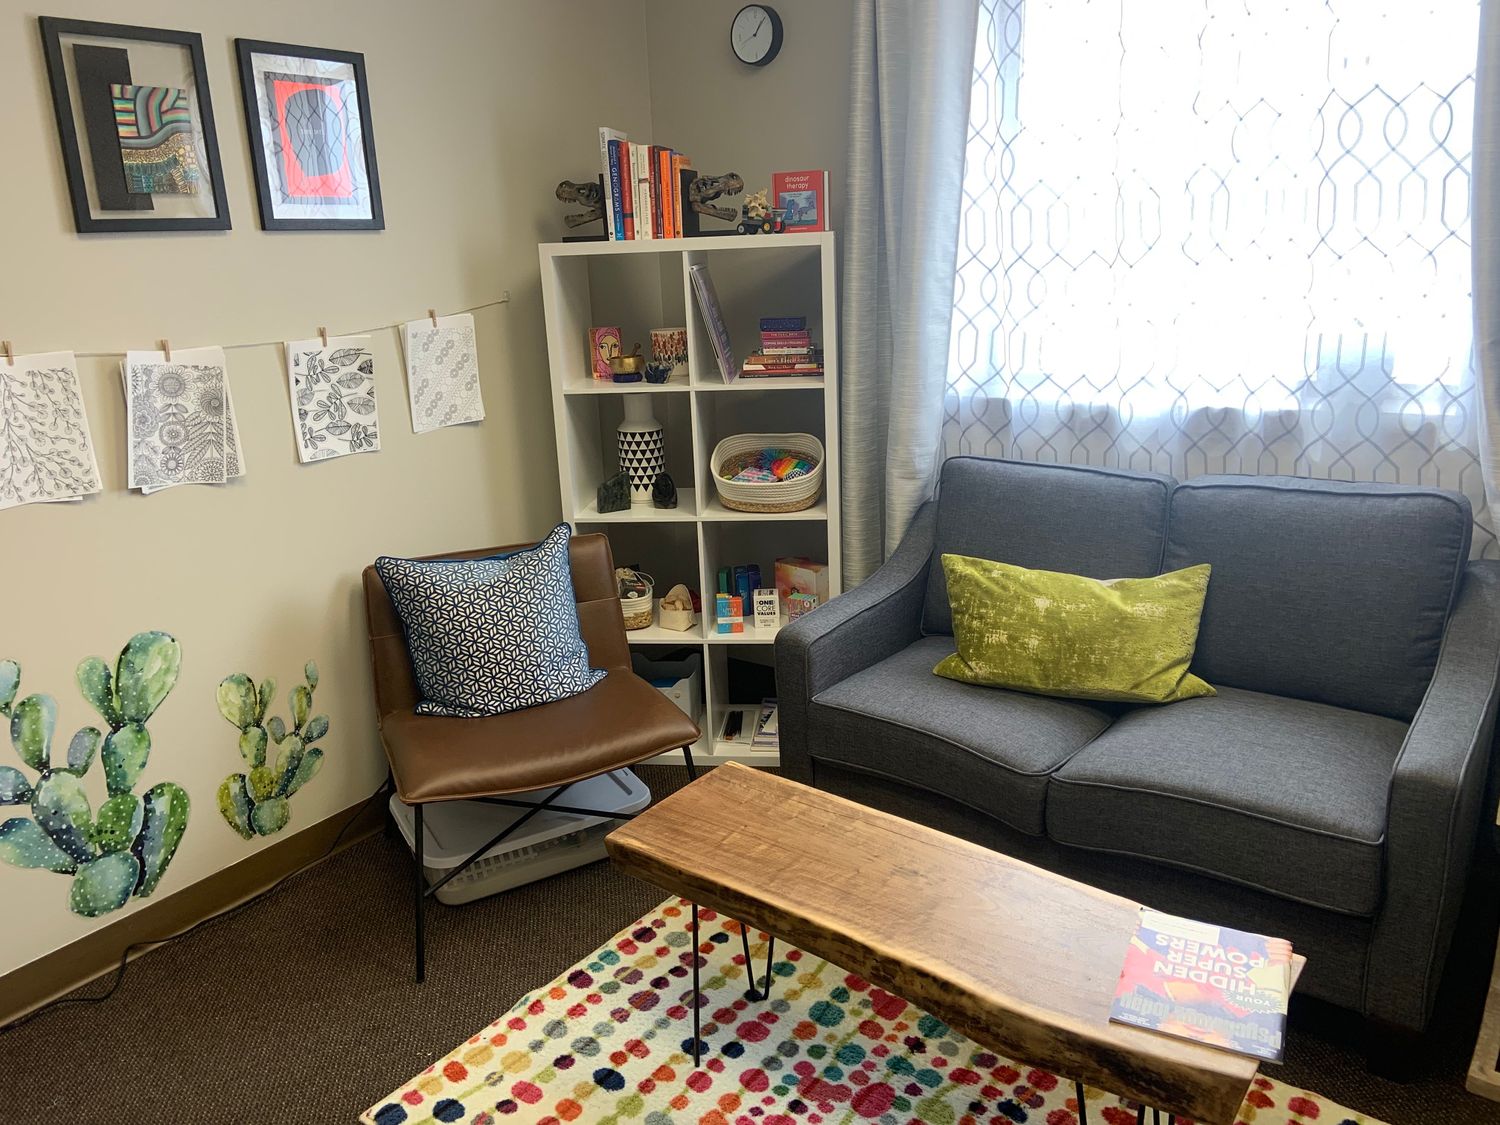 Gallery Photo of Counseling room, office